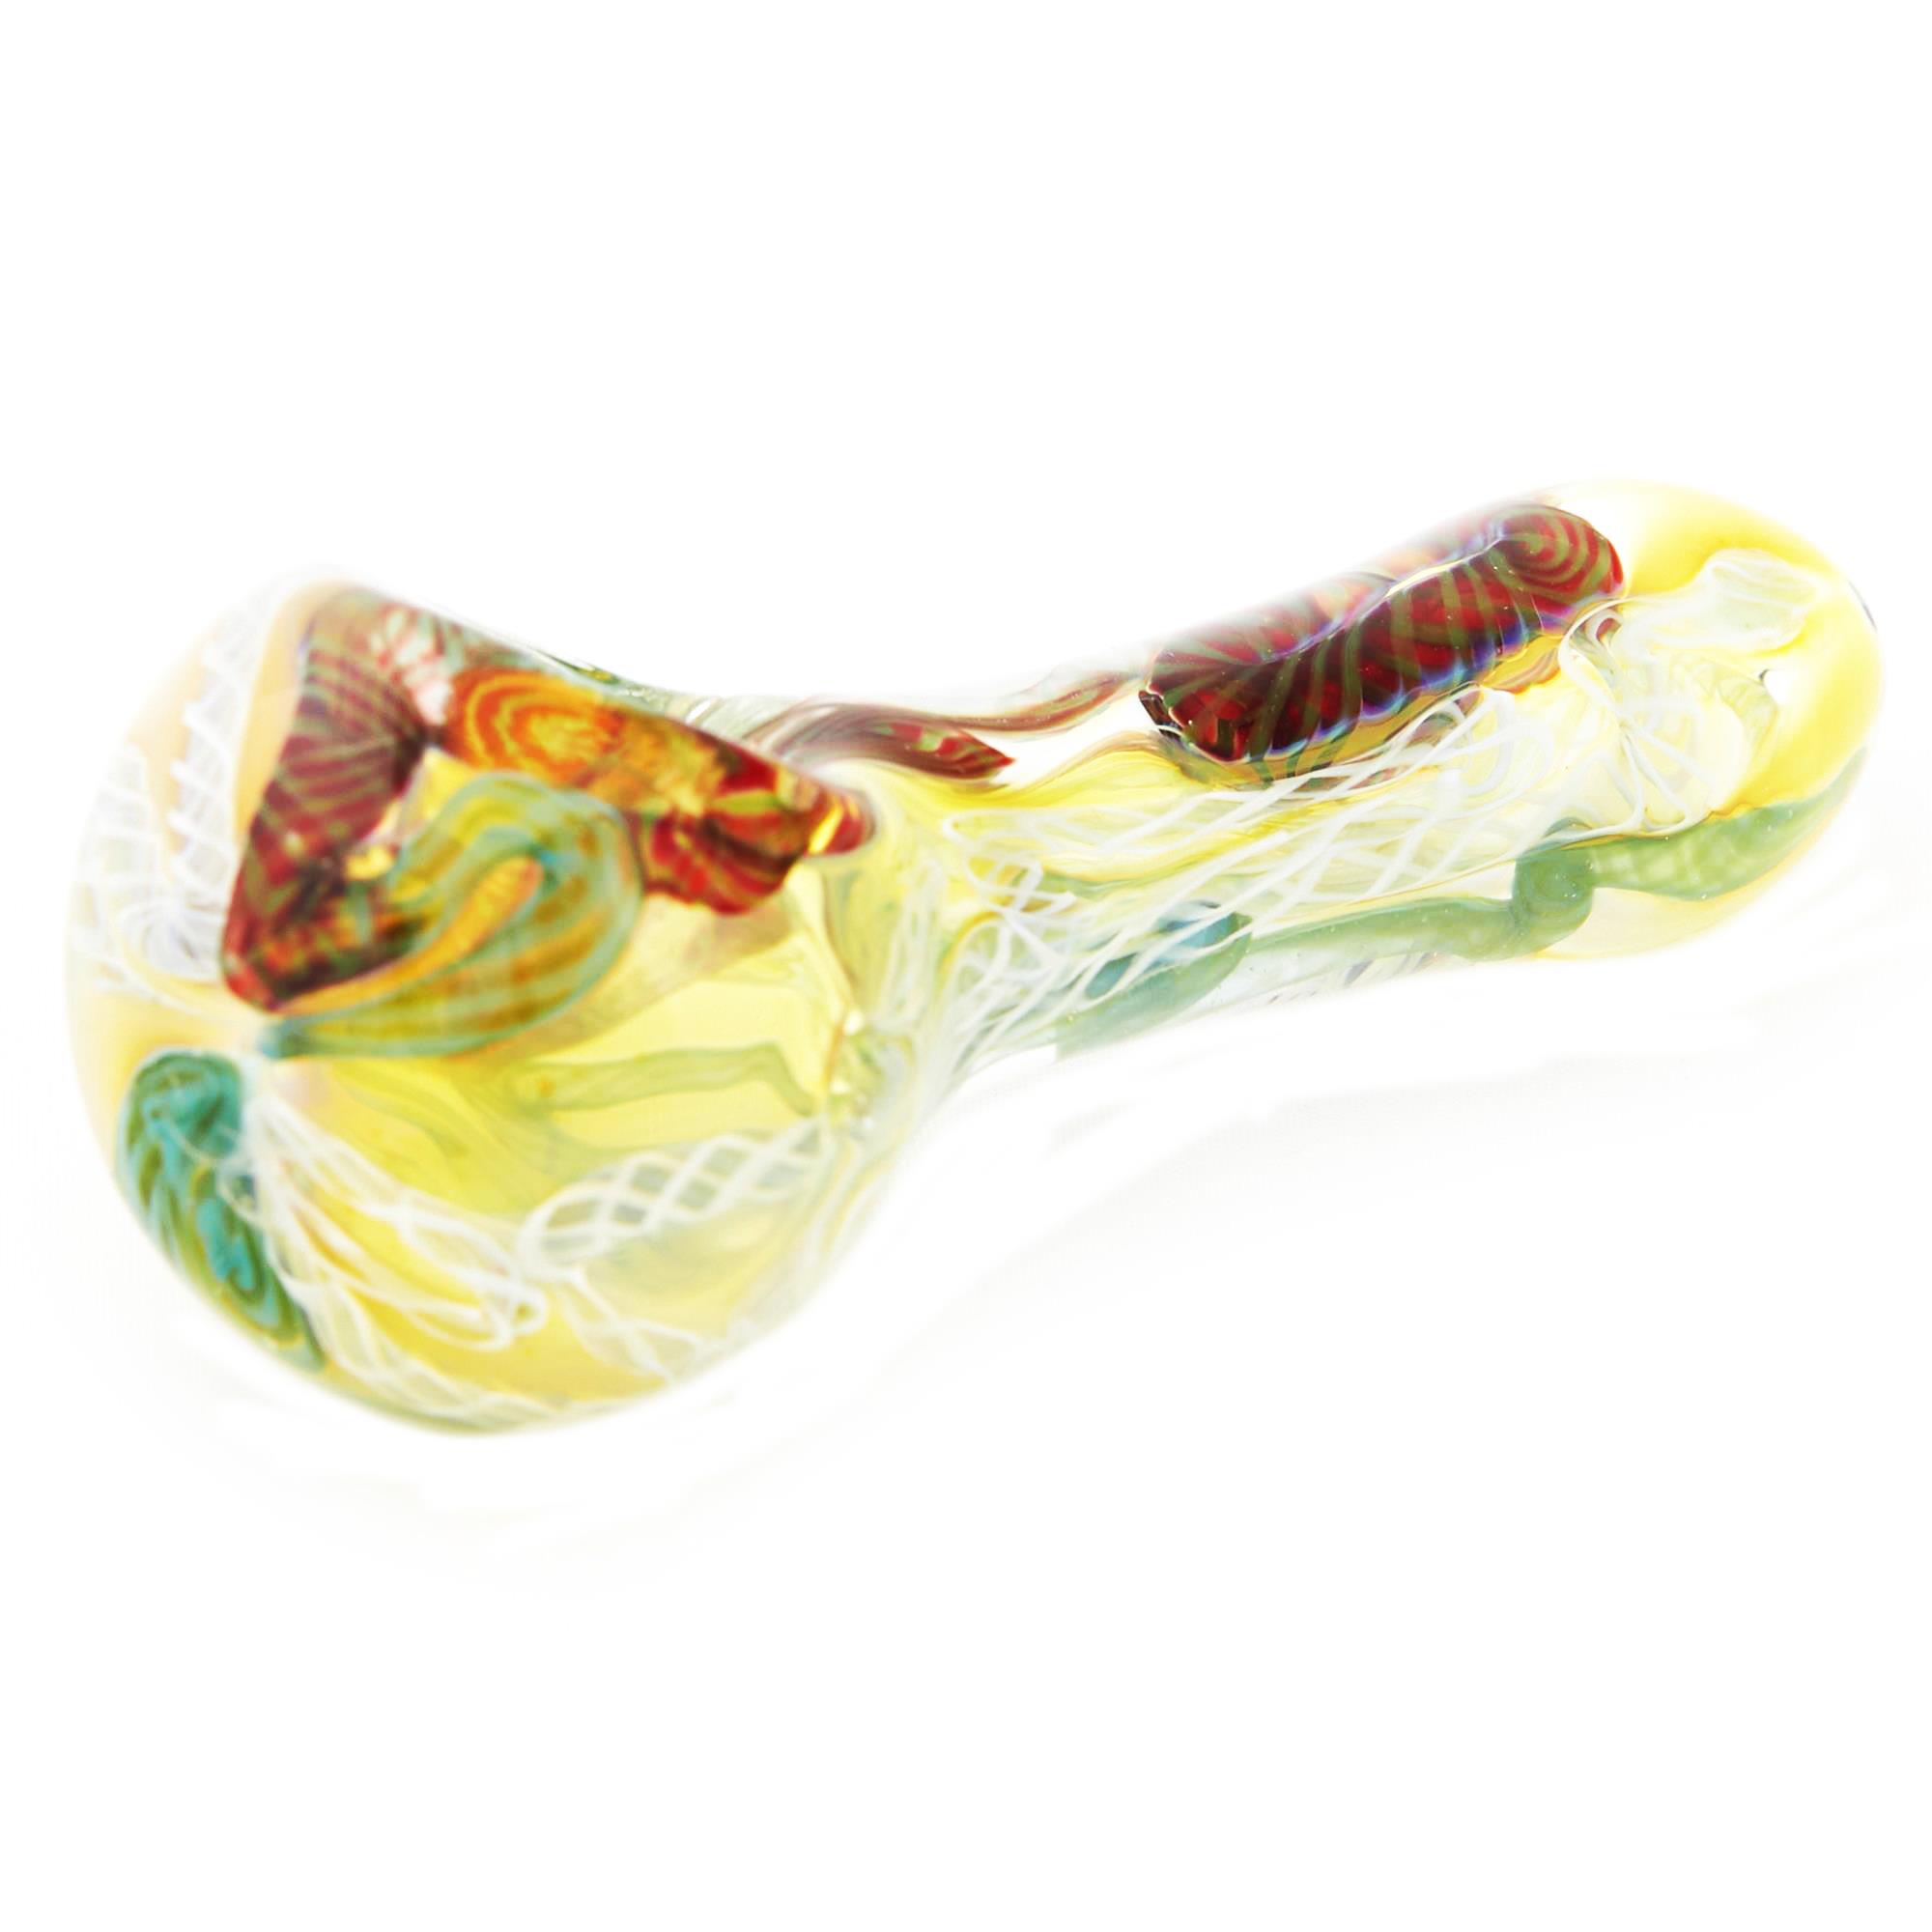 FREE YOUR MIND SPOON PIPE